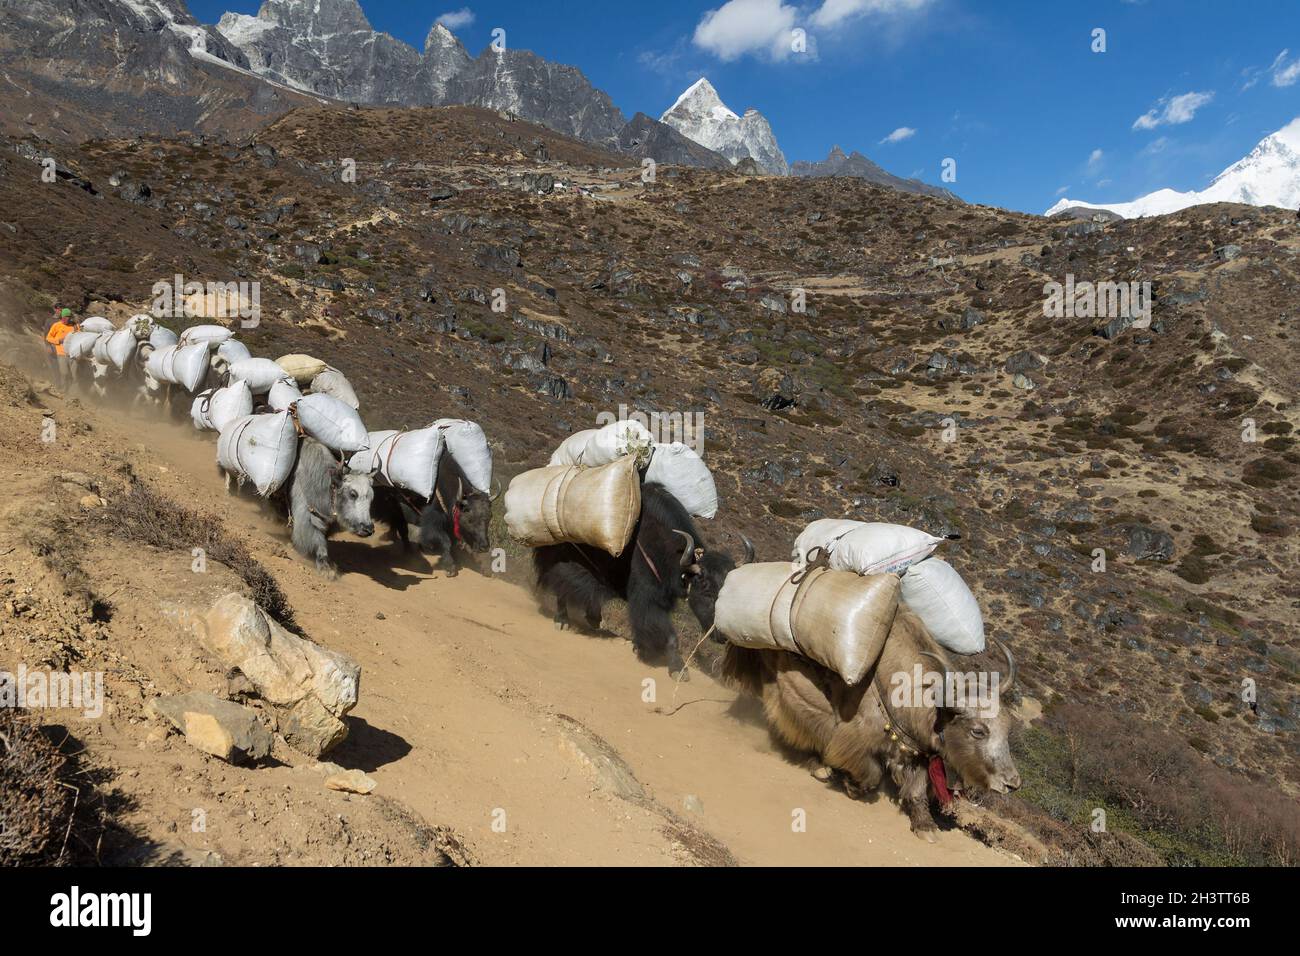 Yaks packed with supplies on a trail in Khumbu Stock Photo